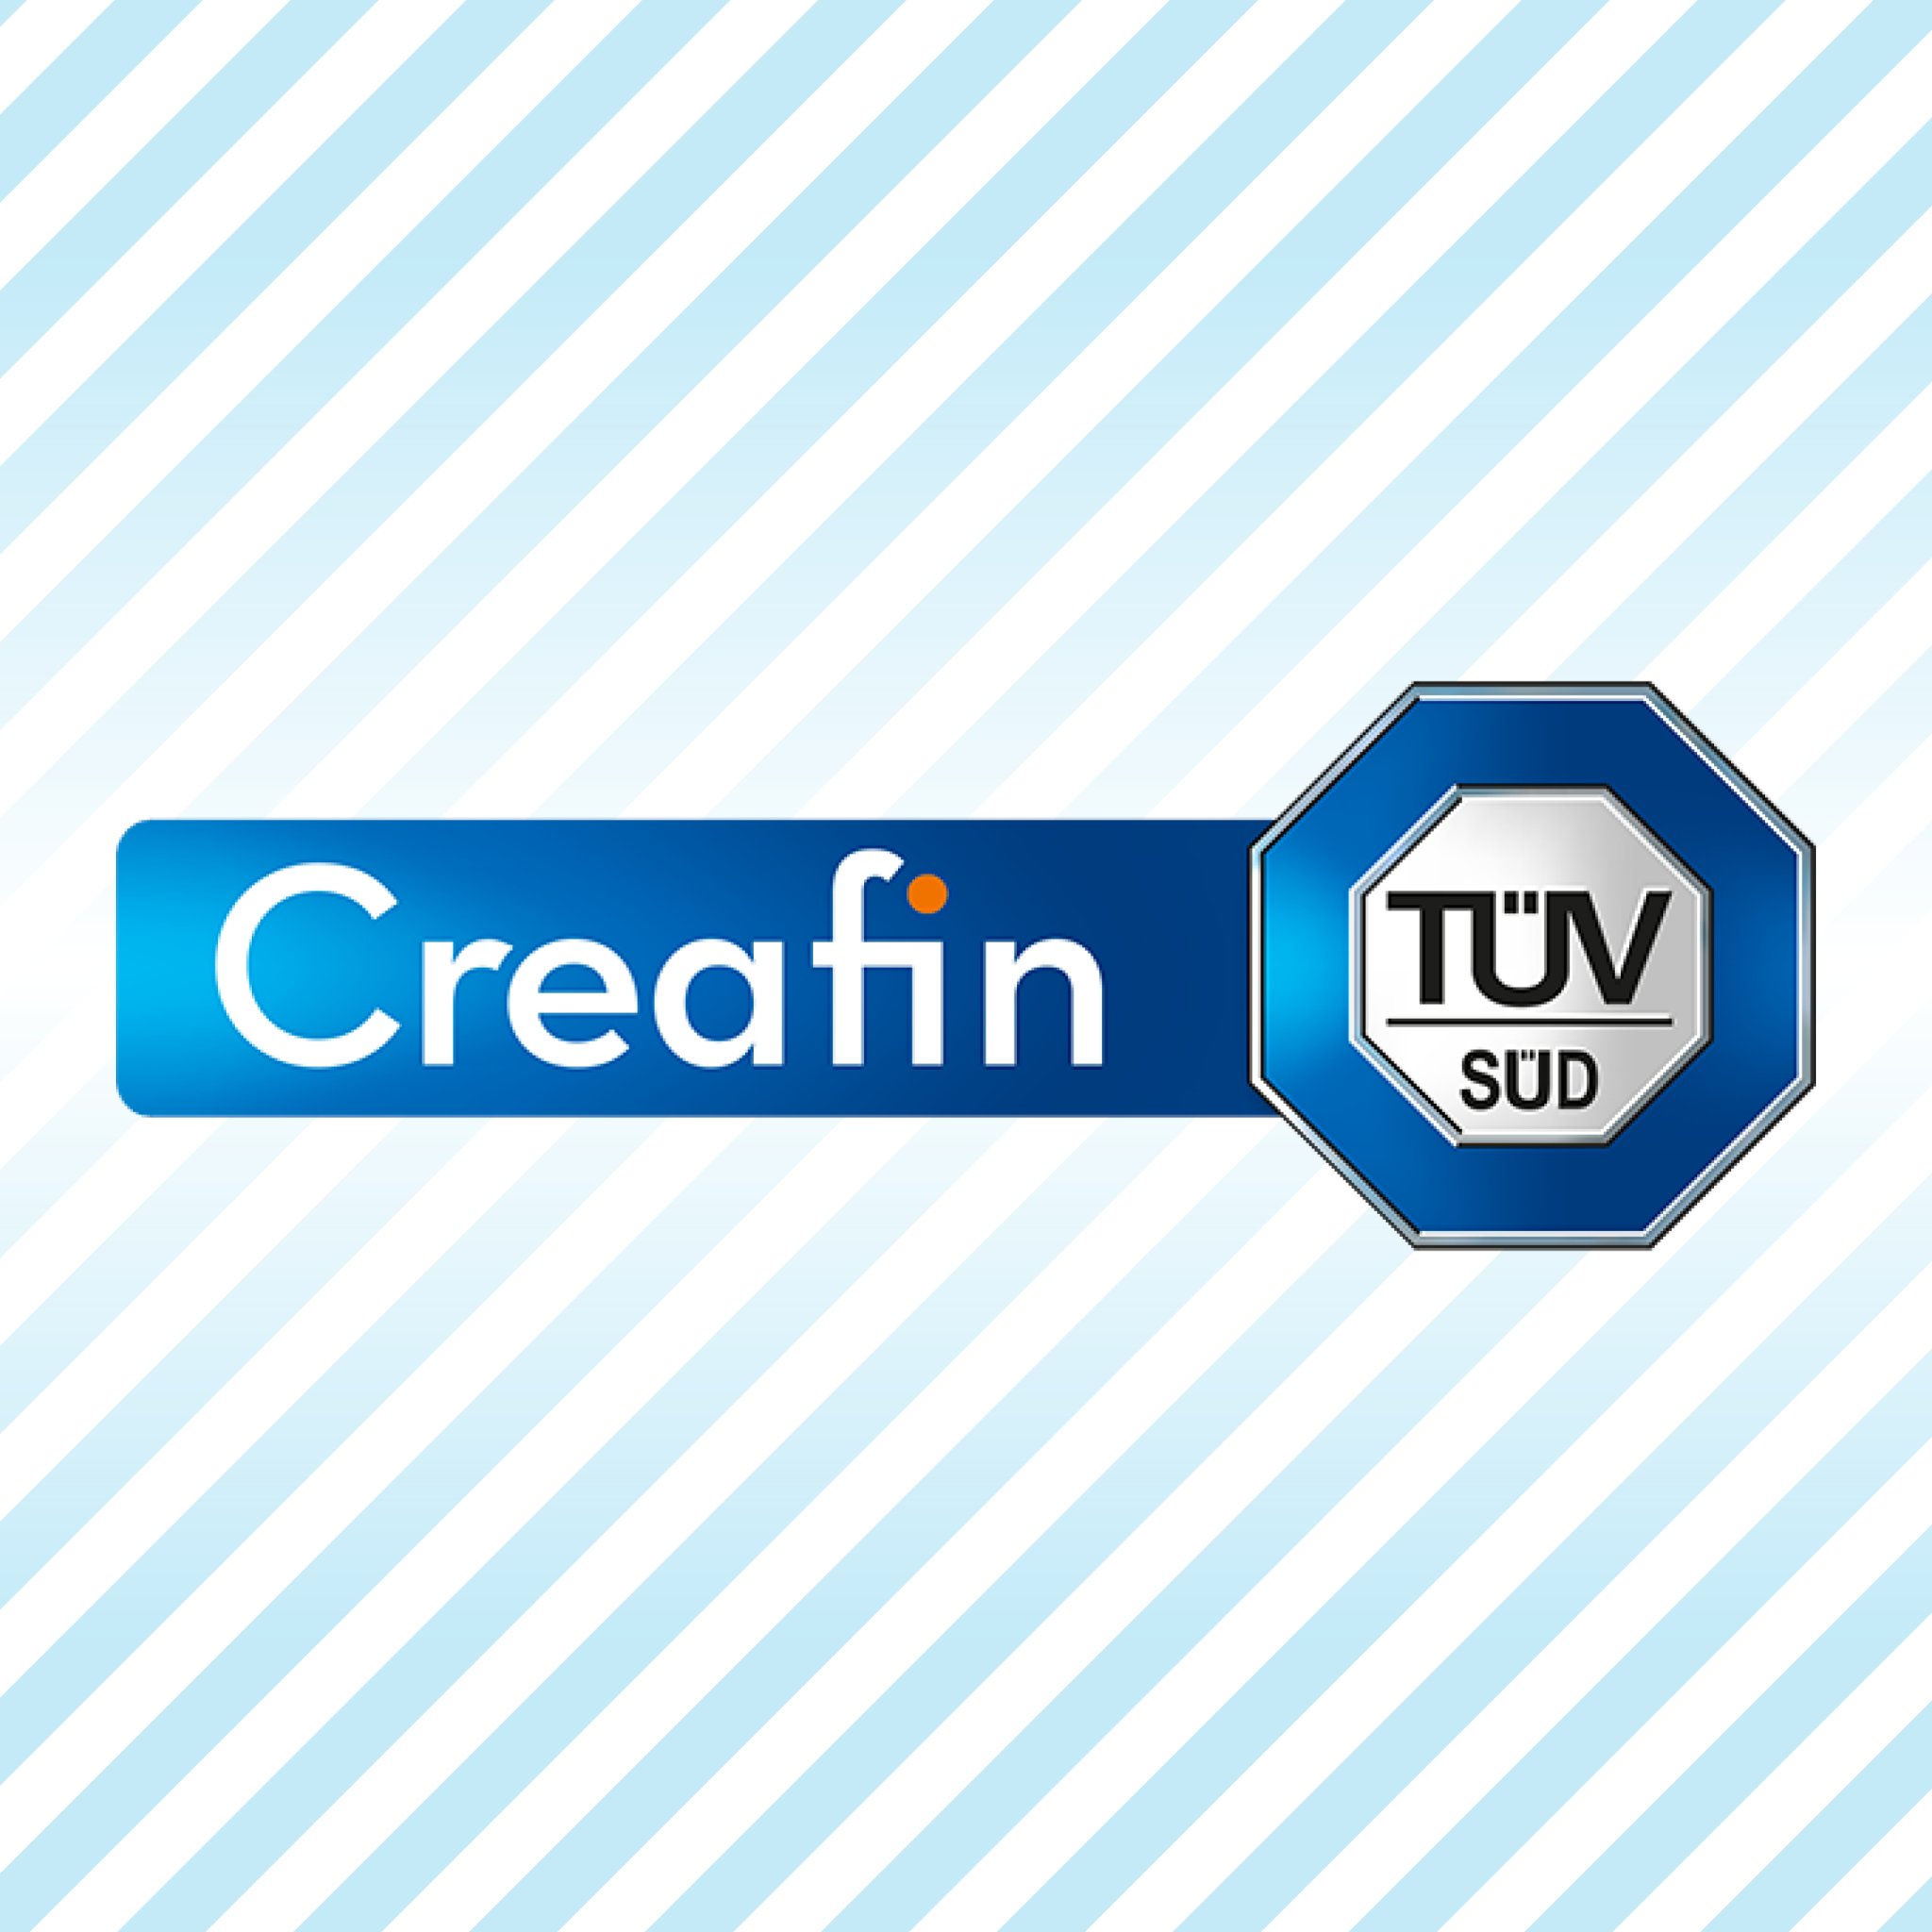 Creafin-TÜVSÜD is a cyclocrossteam founded in september 2018 and based in Belgium